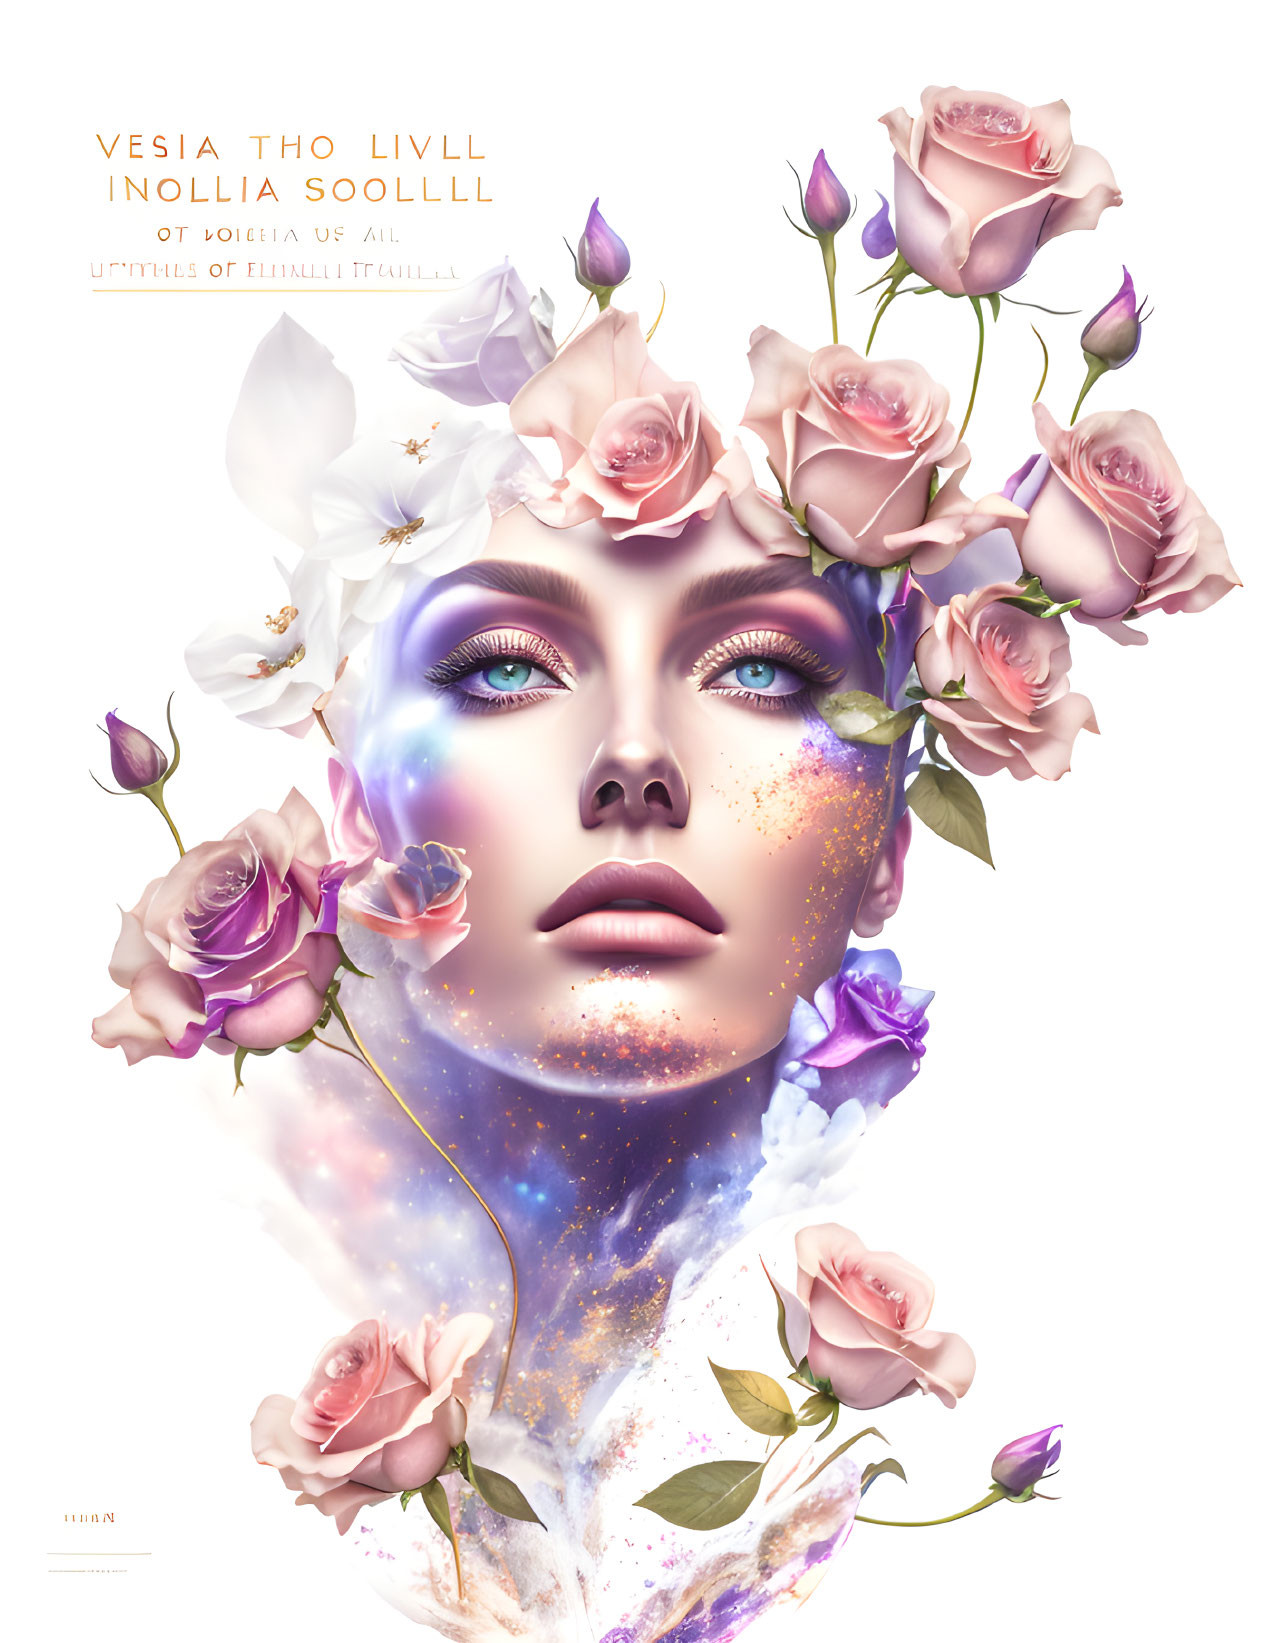 Woman's face with pink roses against cosmic backdrop: Surreal art blend of nature and universe